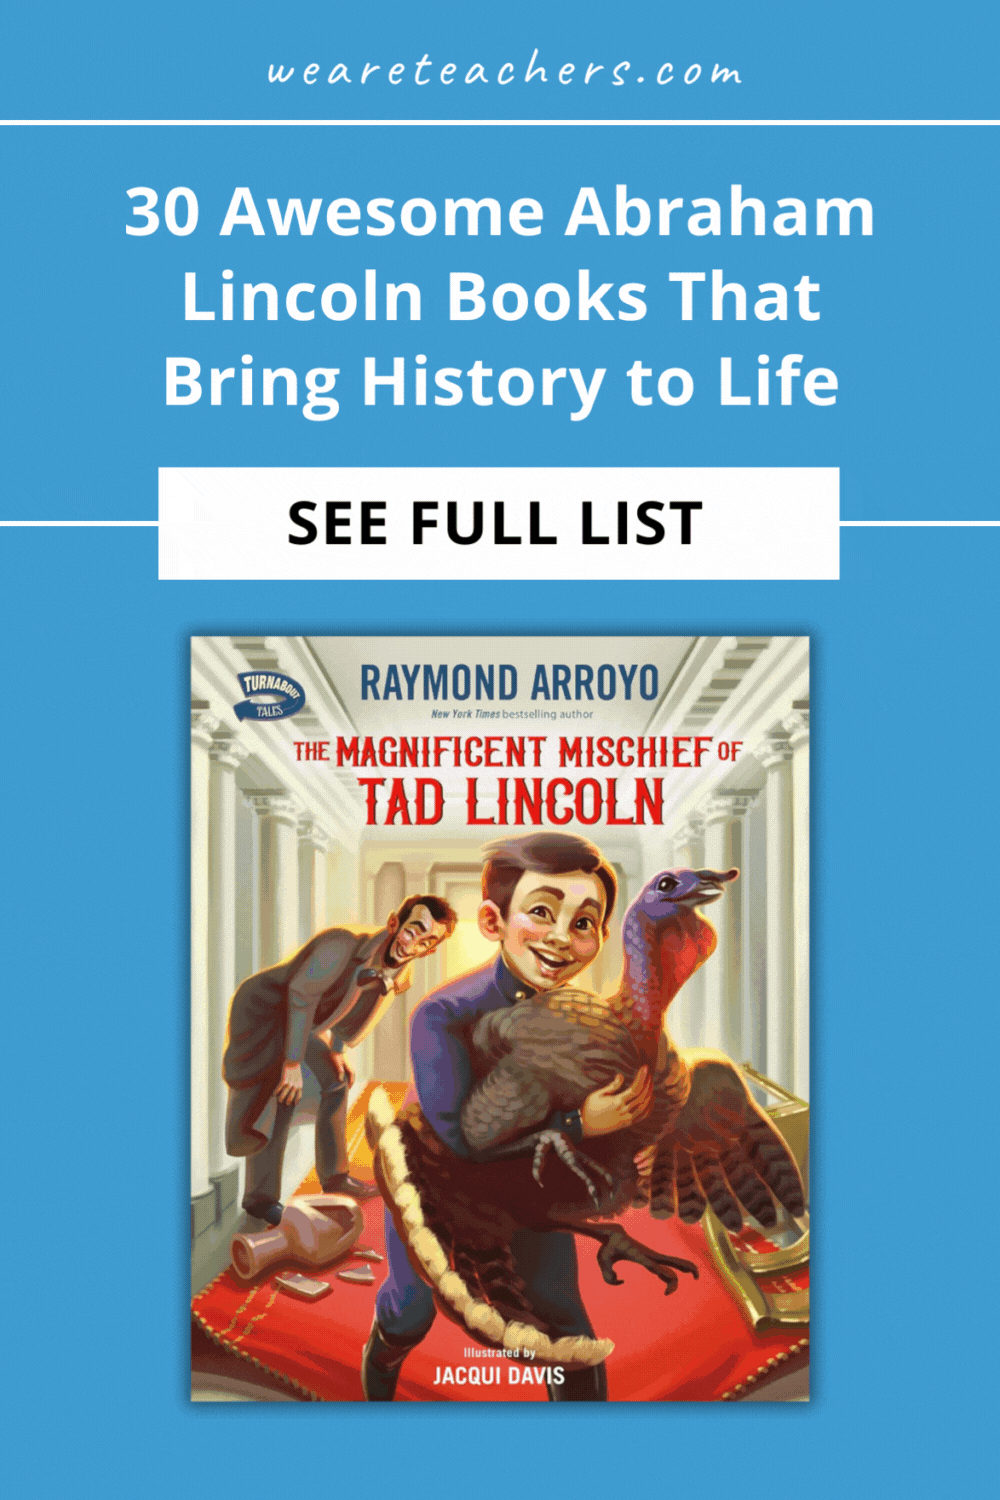 Abraham Lincoln was one of the most important presidents to lead our nation. These Abraham Lincoln books help teach about his life and work.